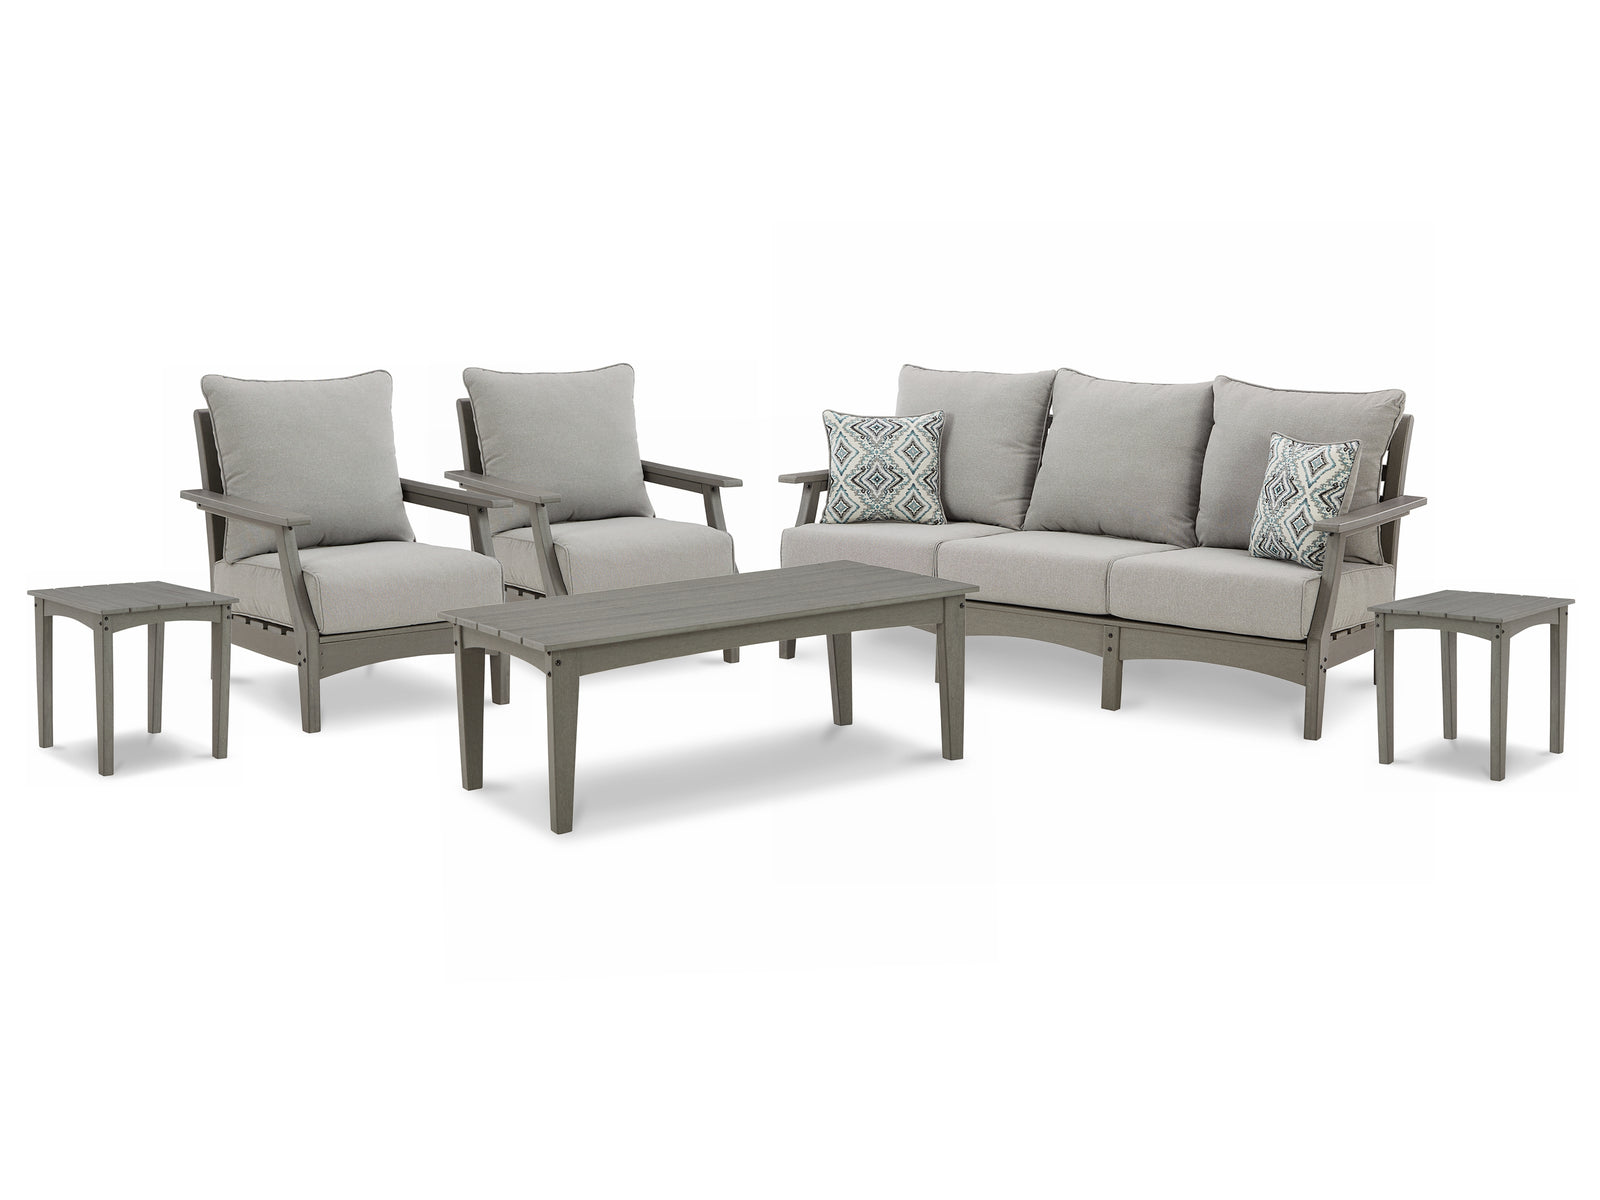 Visola Gray Outdoor Sofa And  2 Lounge Chairs With Coffee Table And 2 End Tables